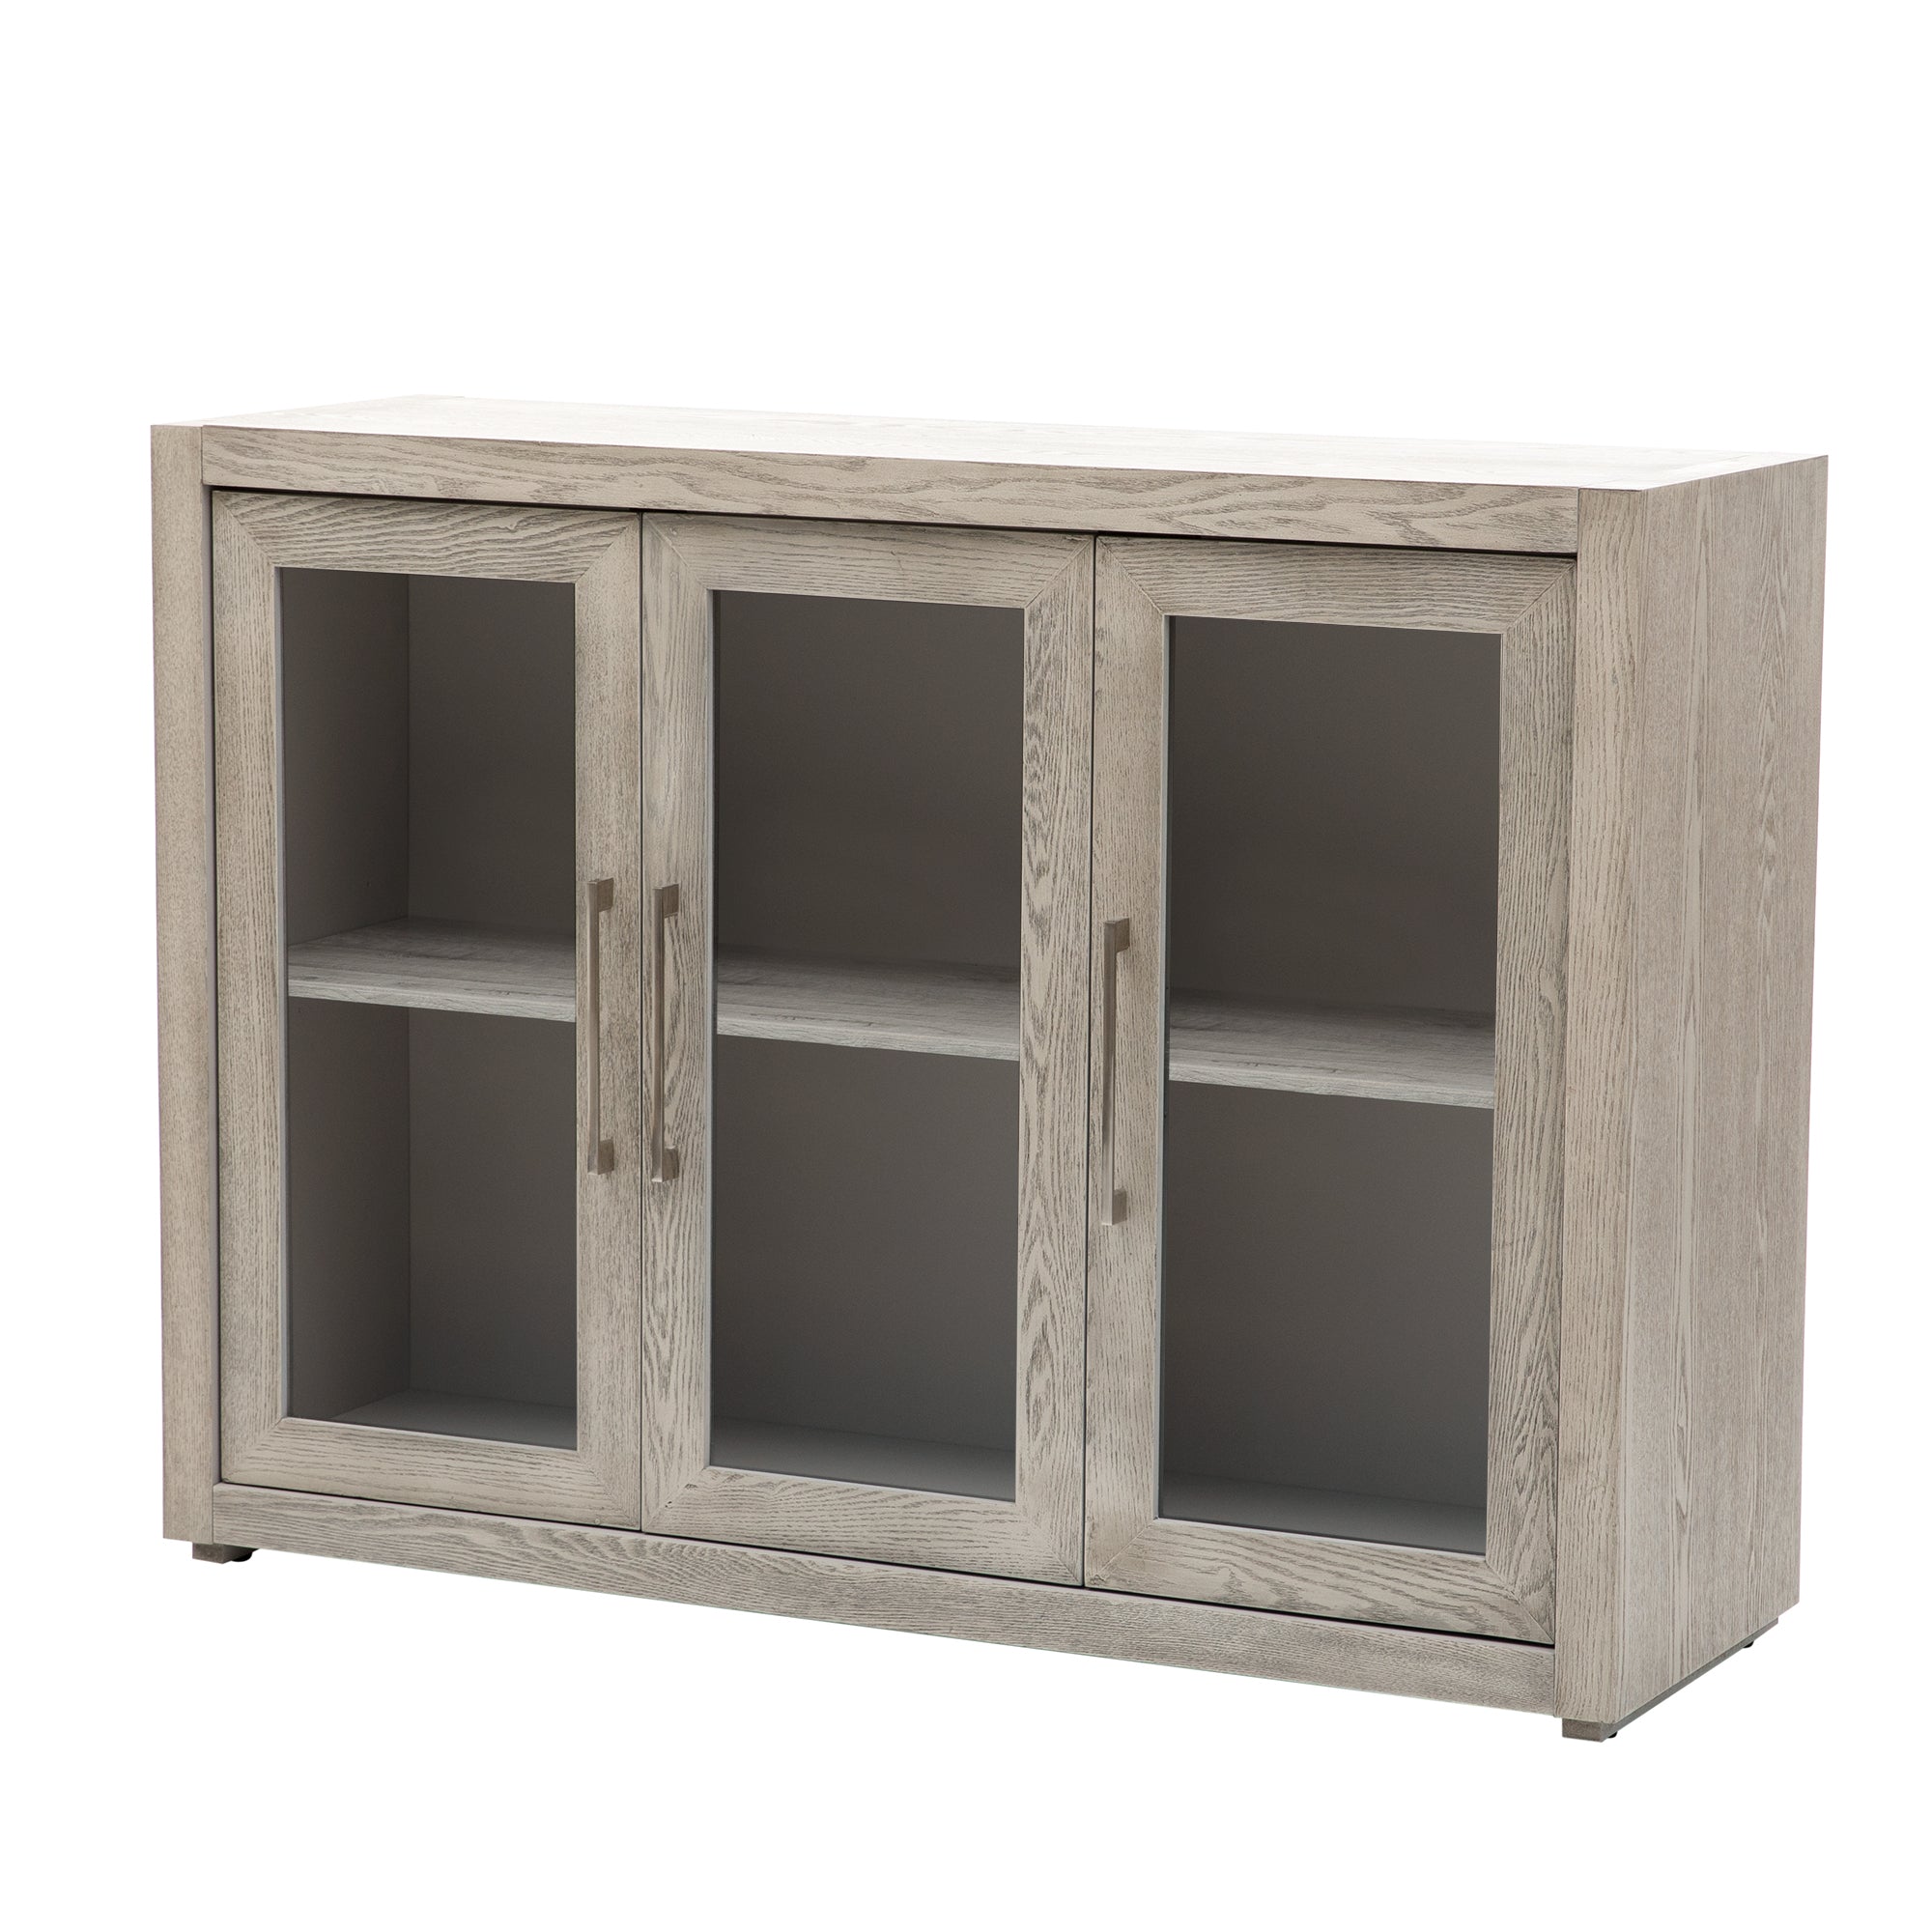 Wood Storage Cabinet with Three Tempered Glass Doors and Adjustable Shelf (Grey)